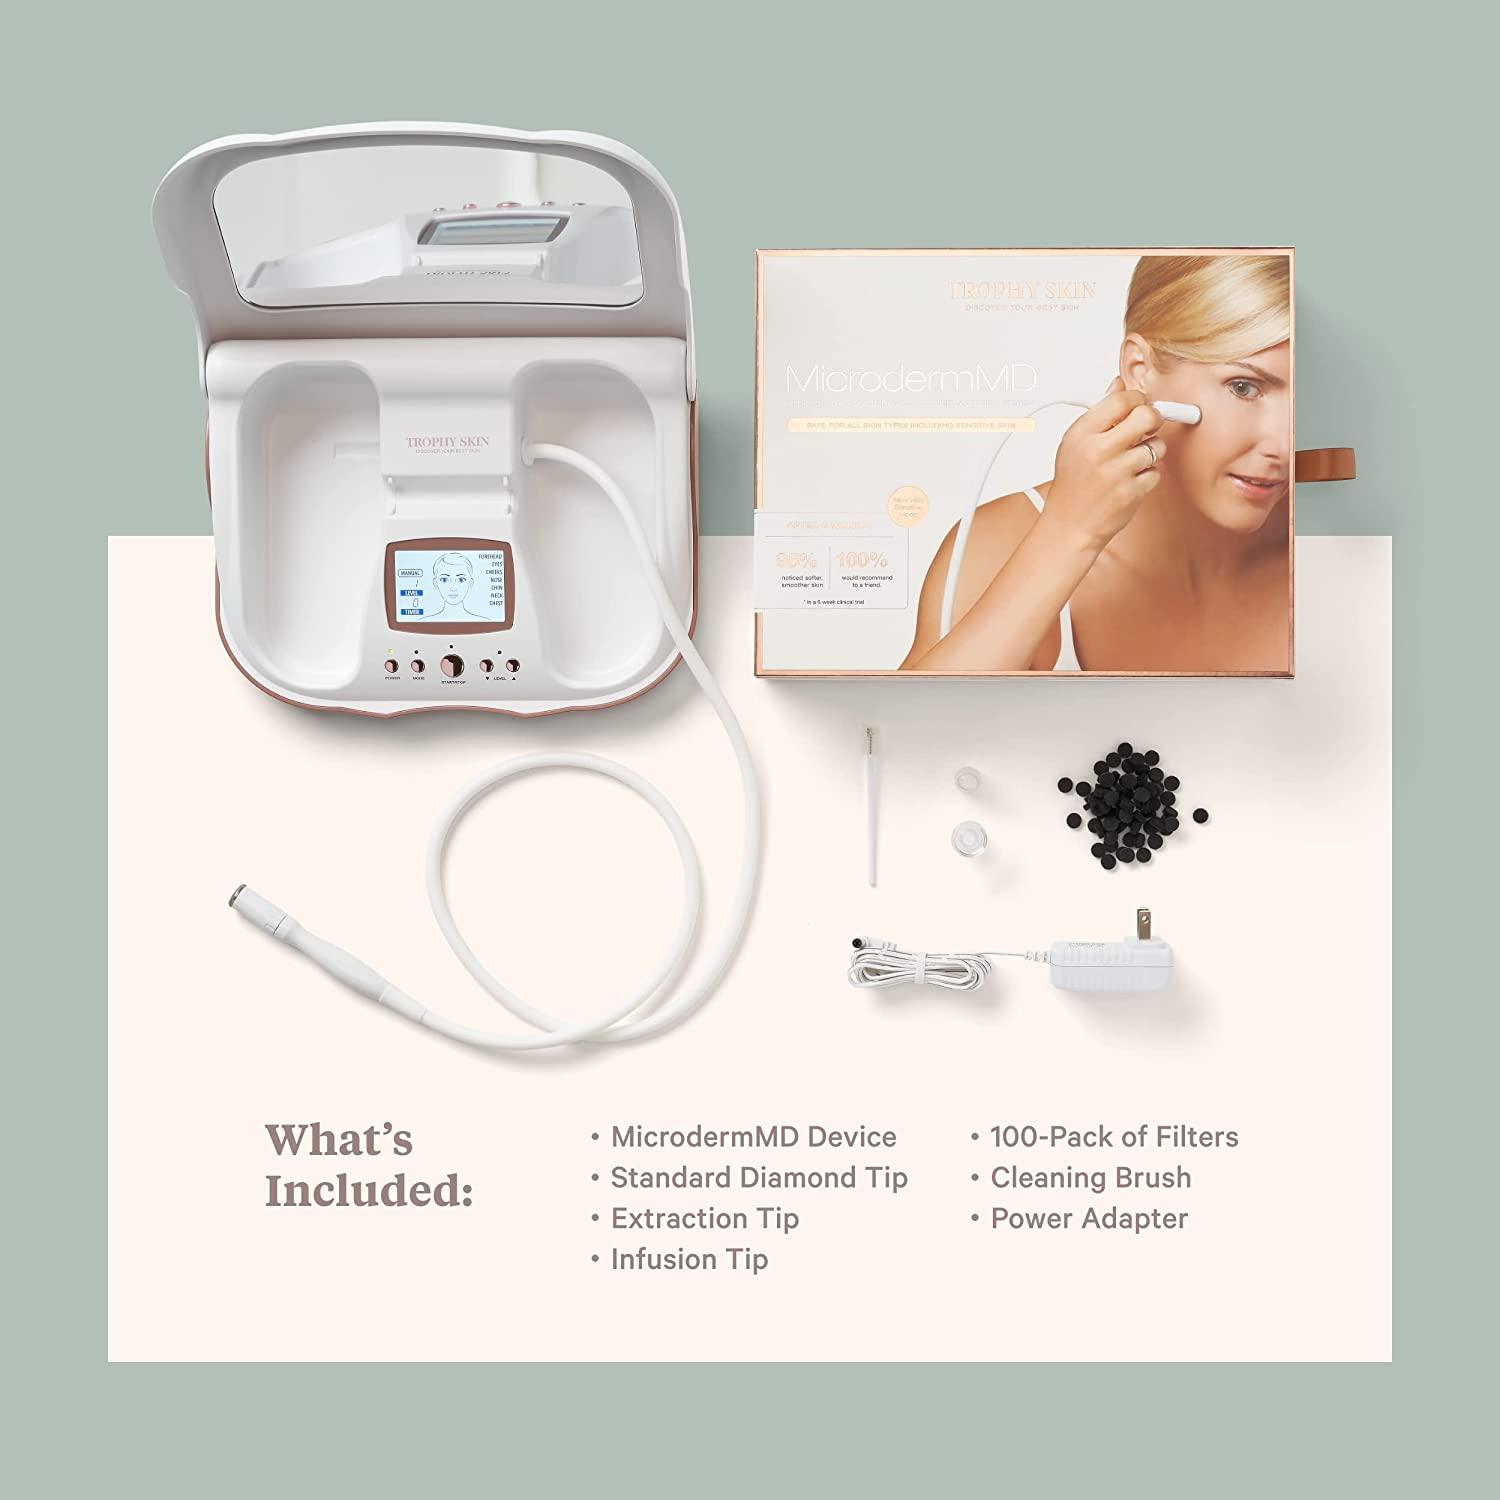 Trophy Skin MicrodermMD - At Home Microdermabrasion Kit - Anti Aging and  Acne Treatment - Contains Real Diamond and Pore Extractor Tips to  Rejuvenate Skin and Reduce Acne Scars - White